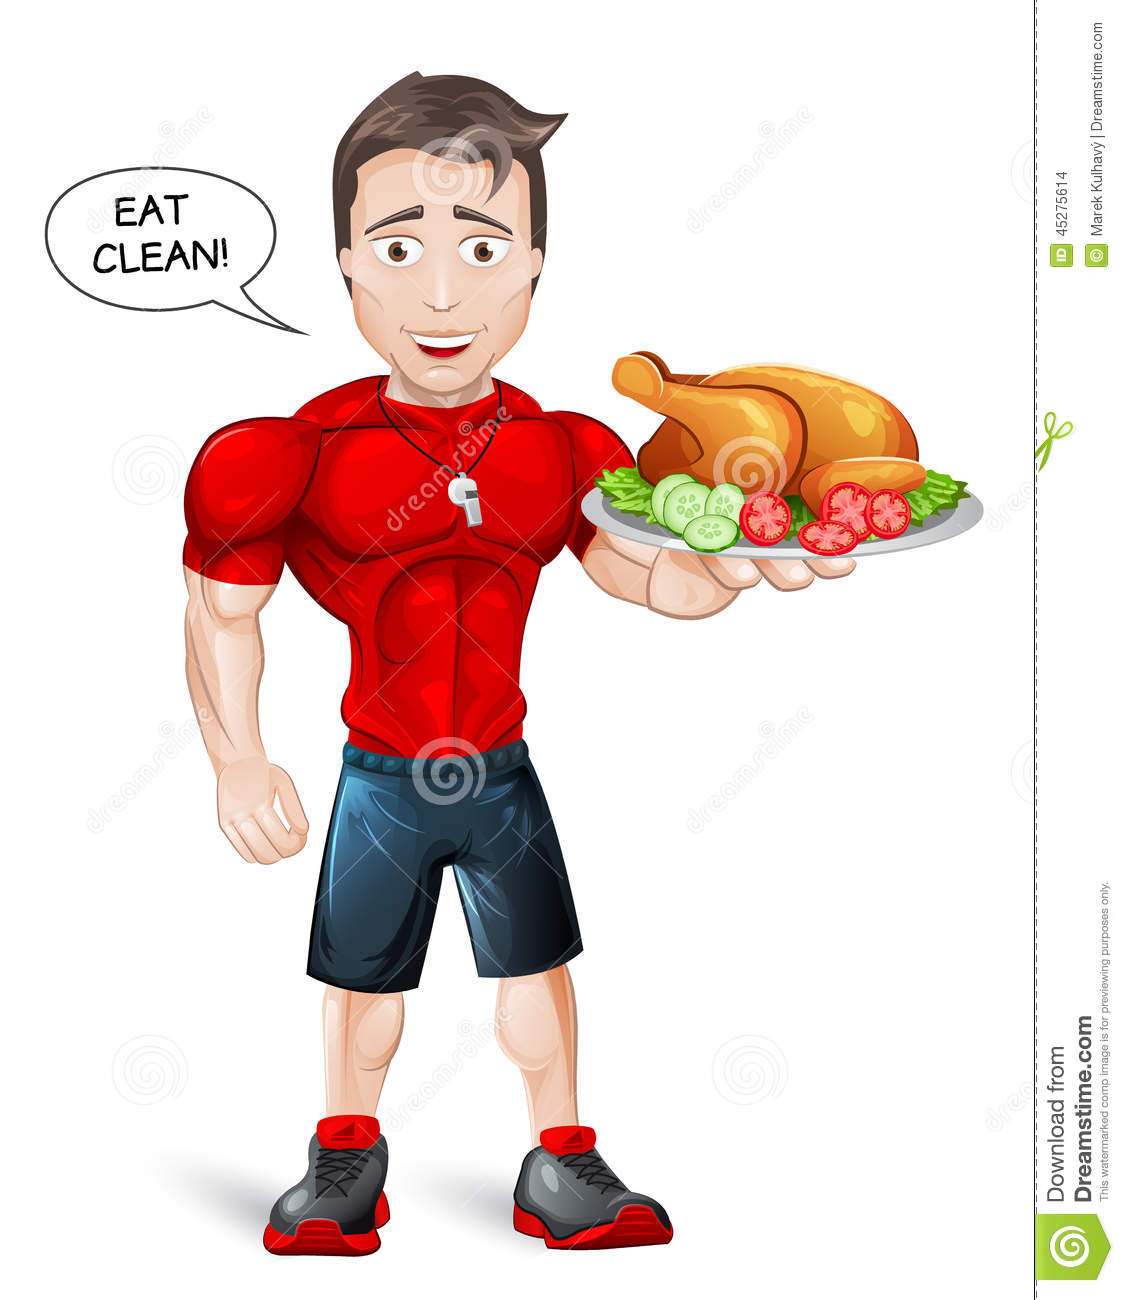 Cartoon Fitness Coach With Healthy Meal Stock Illustration   Image